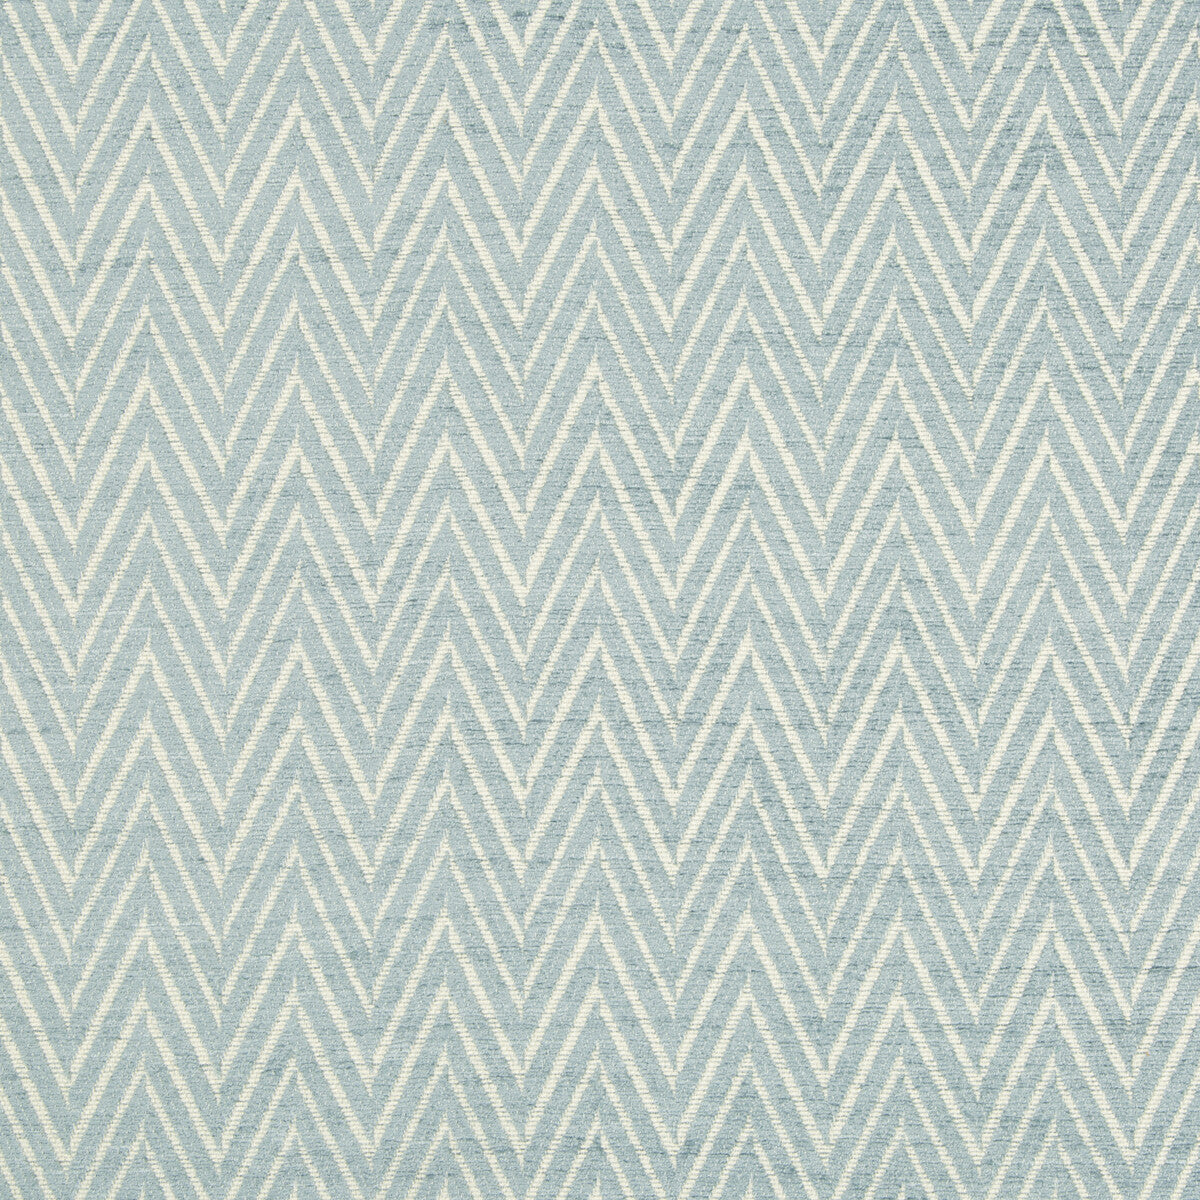 Kravet Design fabric in 34690-5 color - pattern 34690.5.0 - by Kravet Design in the Crypton Home collection